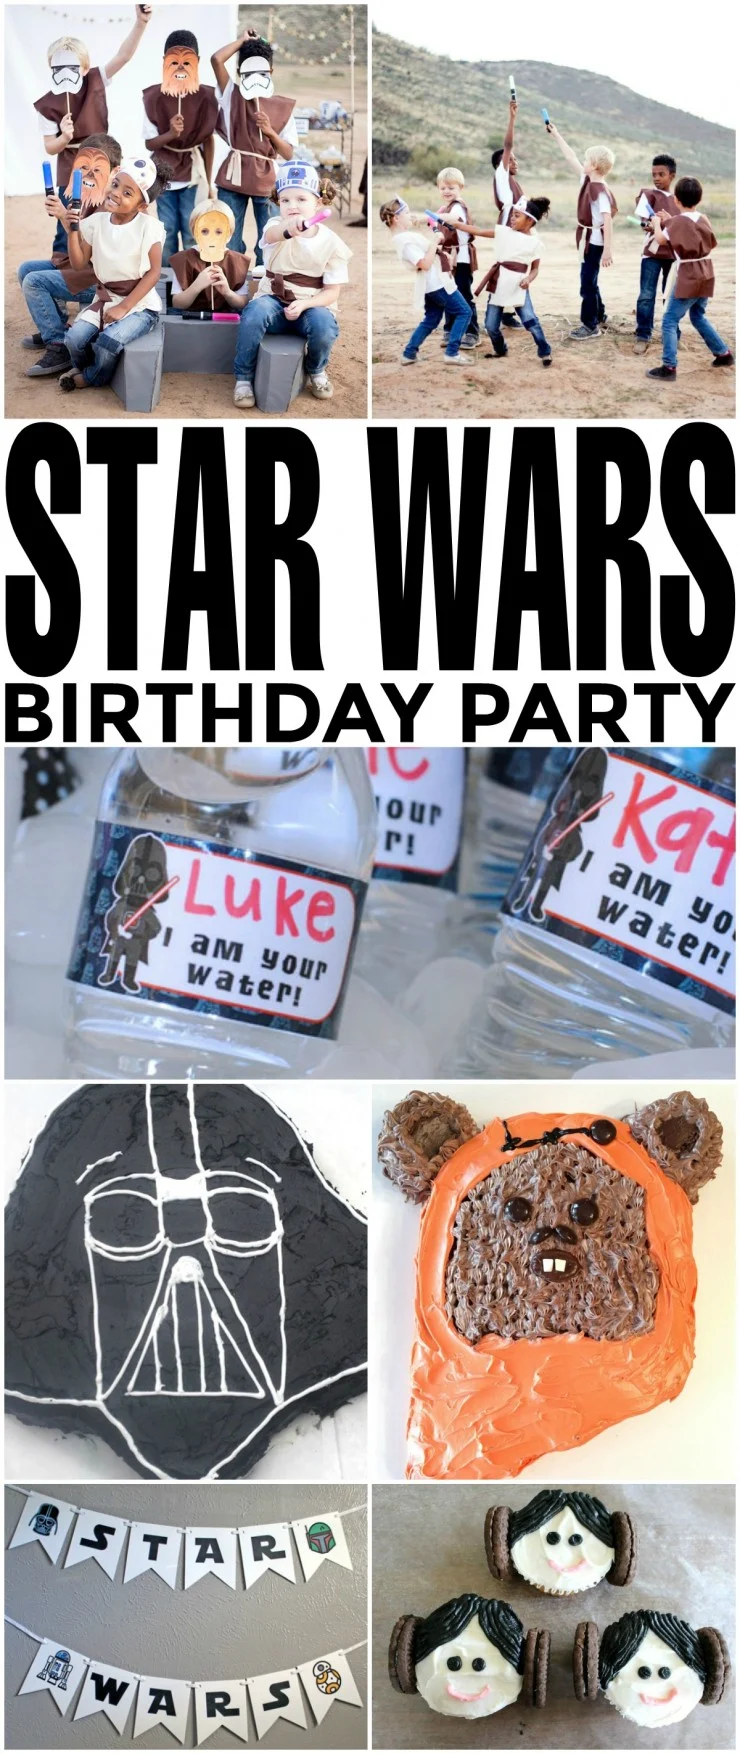 How to Throw the Ultimate Star Wars Birthday Party to please any Star Wars fan on their birthday. A Star Wars themed birthday party is a natural choice with the surging popularity of the franchise. Check out these 25 ideas that will help you throw an amazing Star Wars themed party for fans of Star Wars!